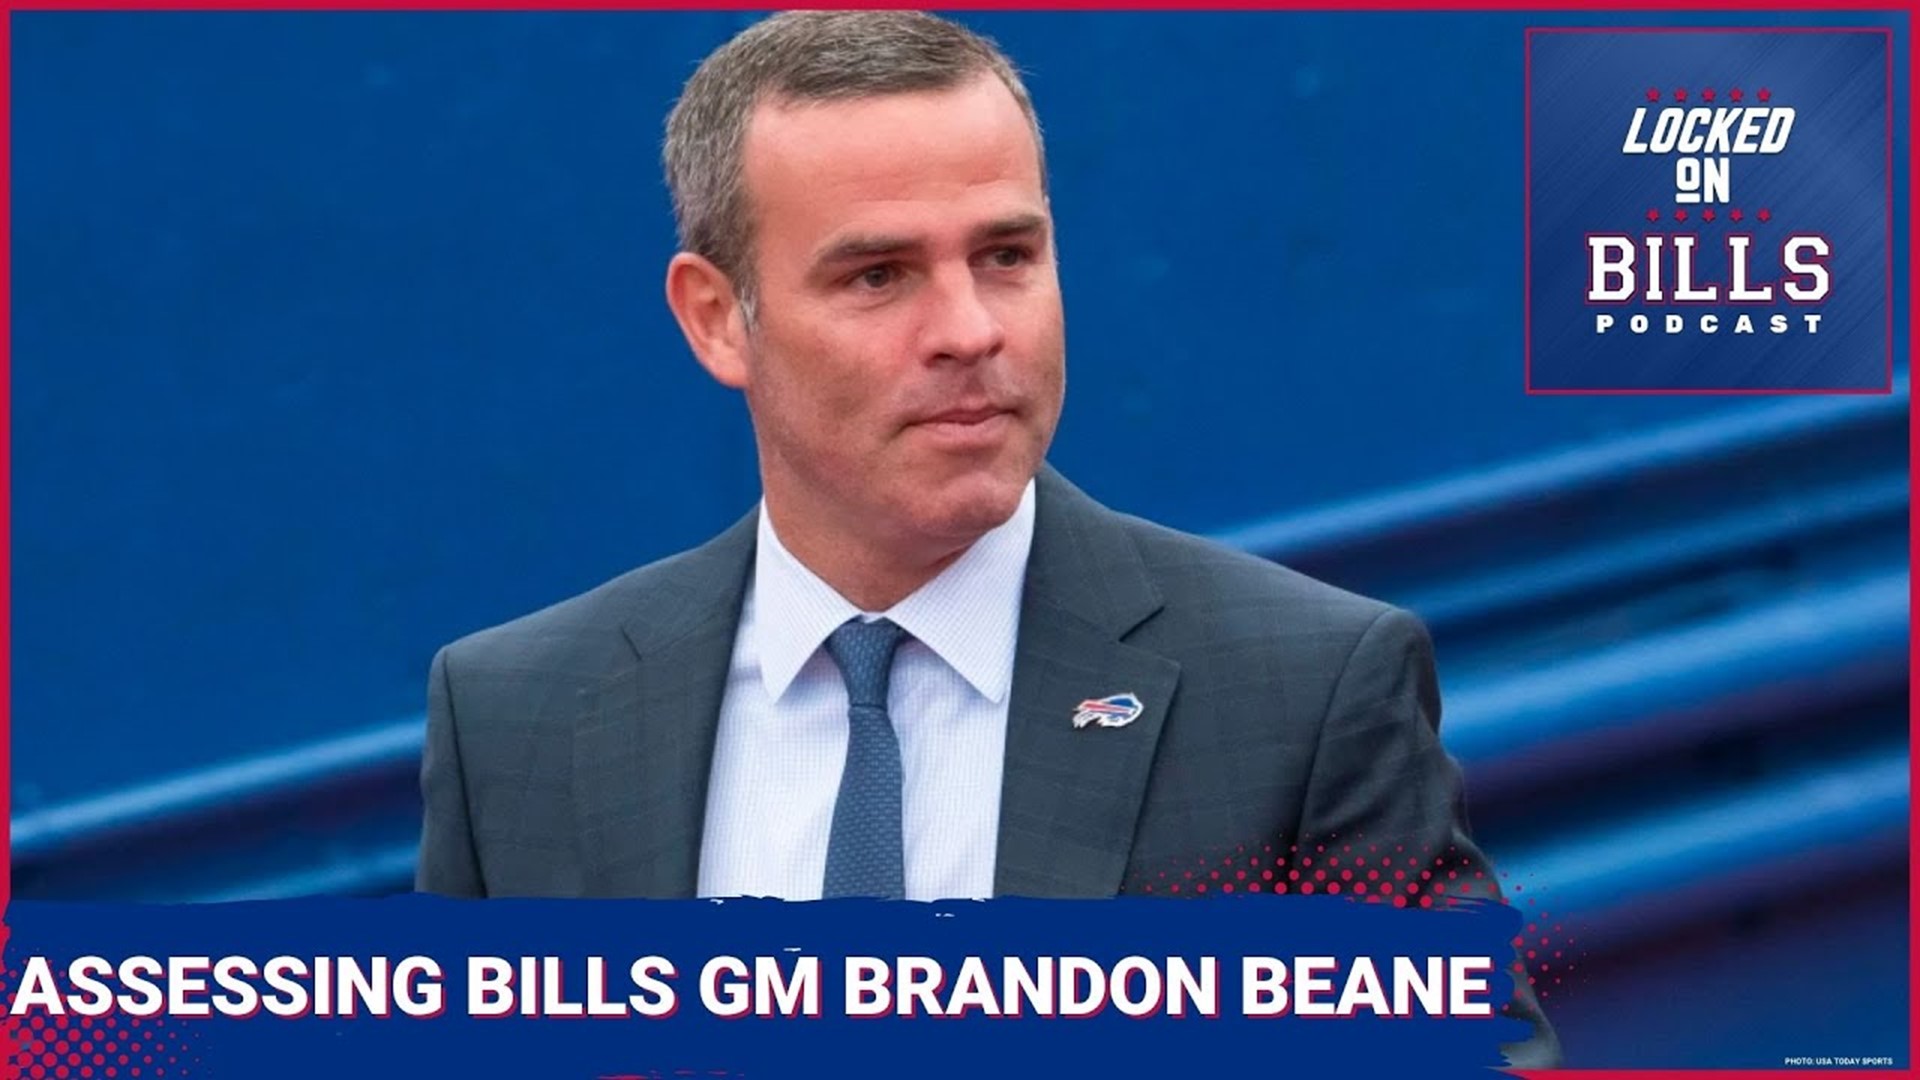 Assessing Buffalo Bills GM Brandon Beane and his status among NFL general managers